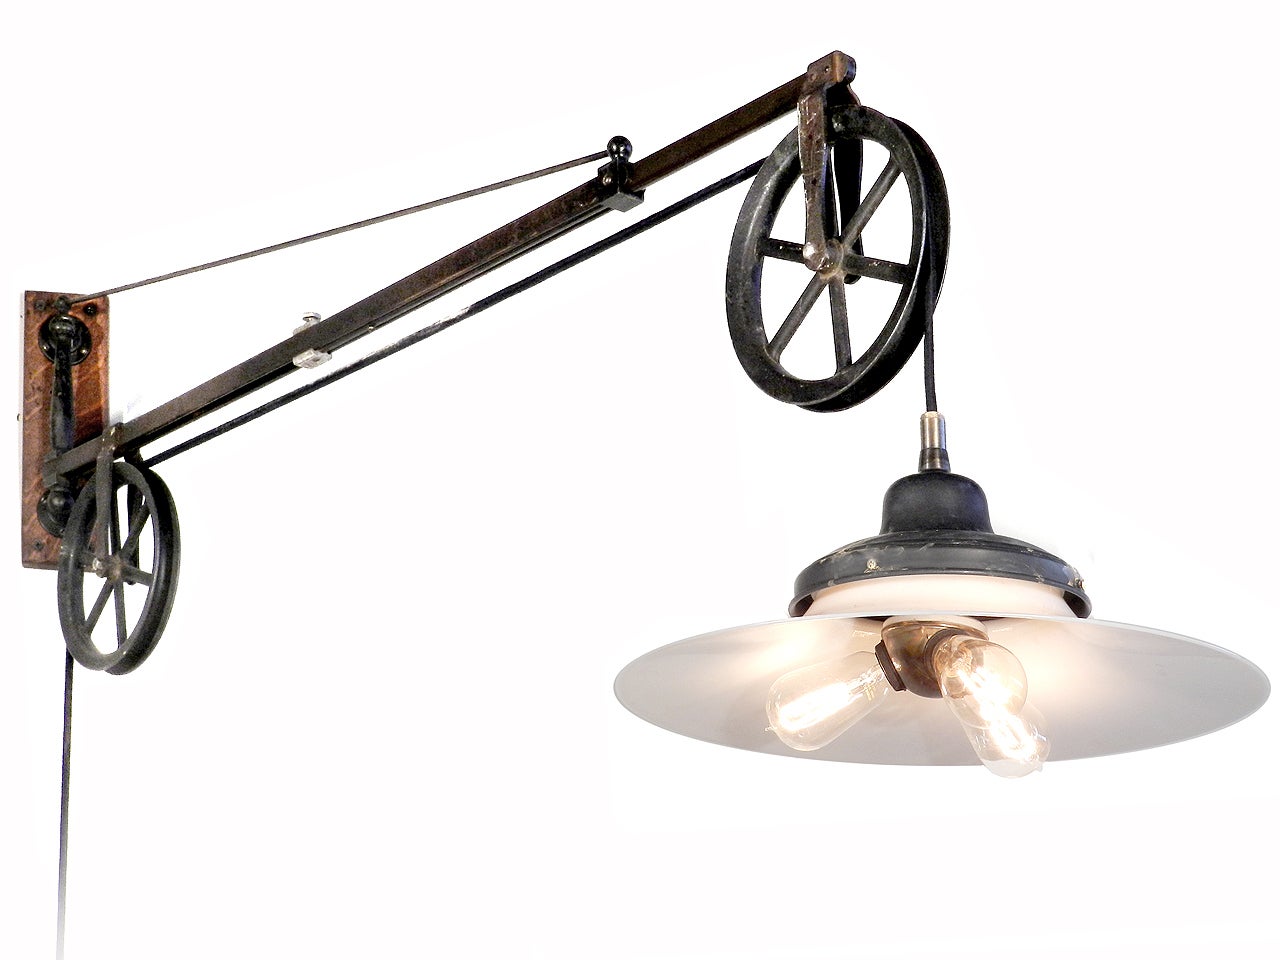 Original Swing Arm Dental Pulley With Large Milk Glass Lamp